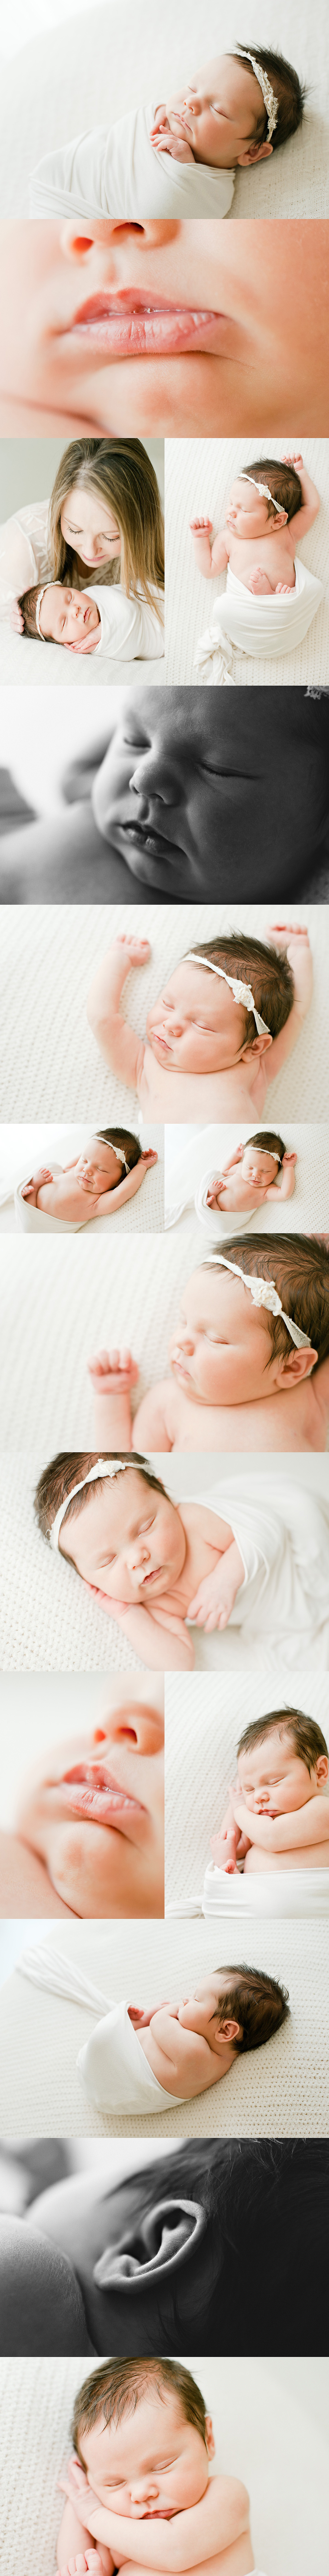 newborn baby girl photography session